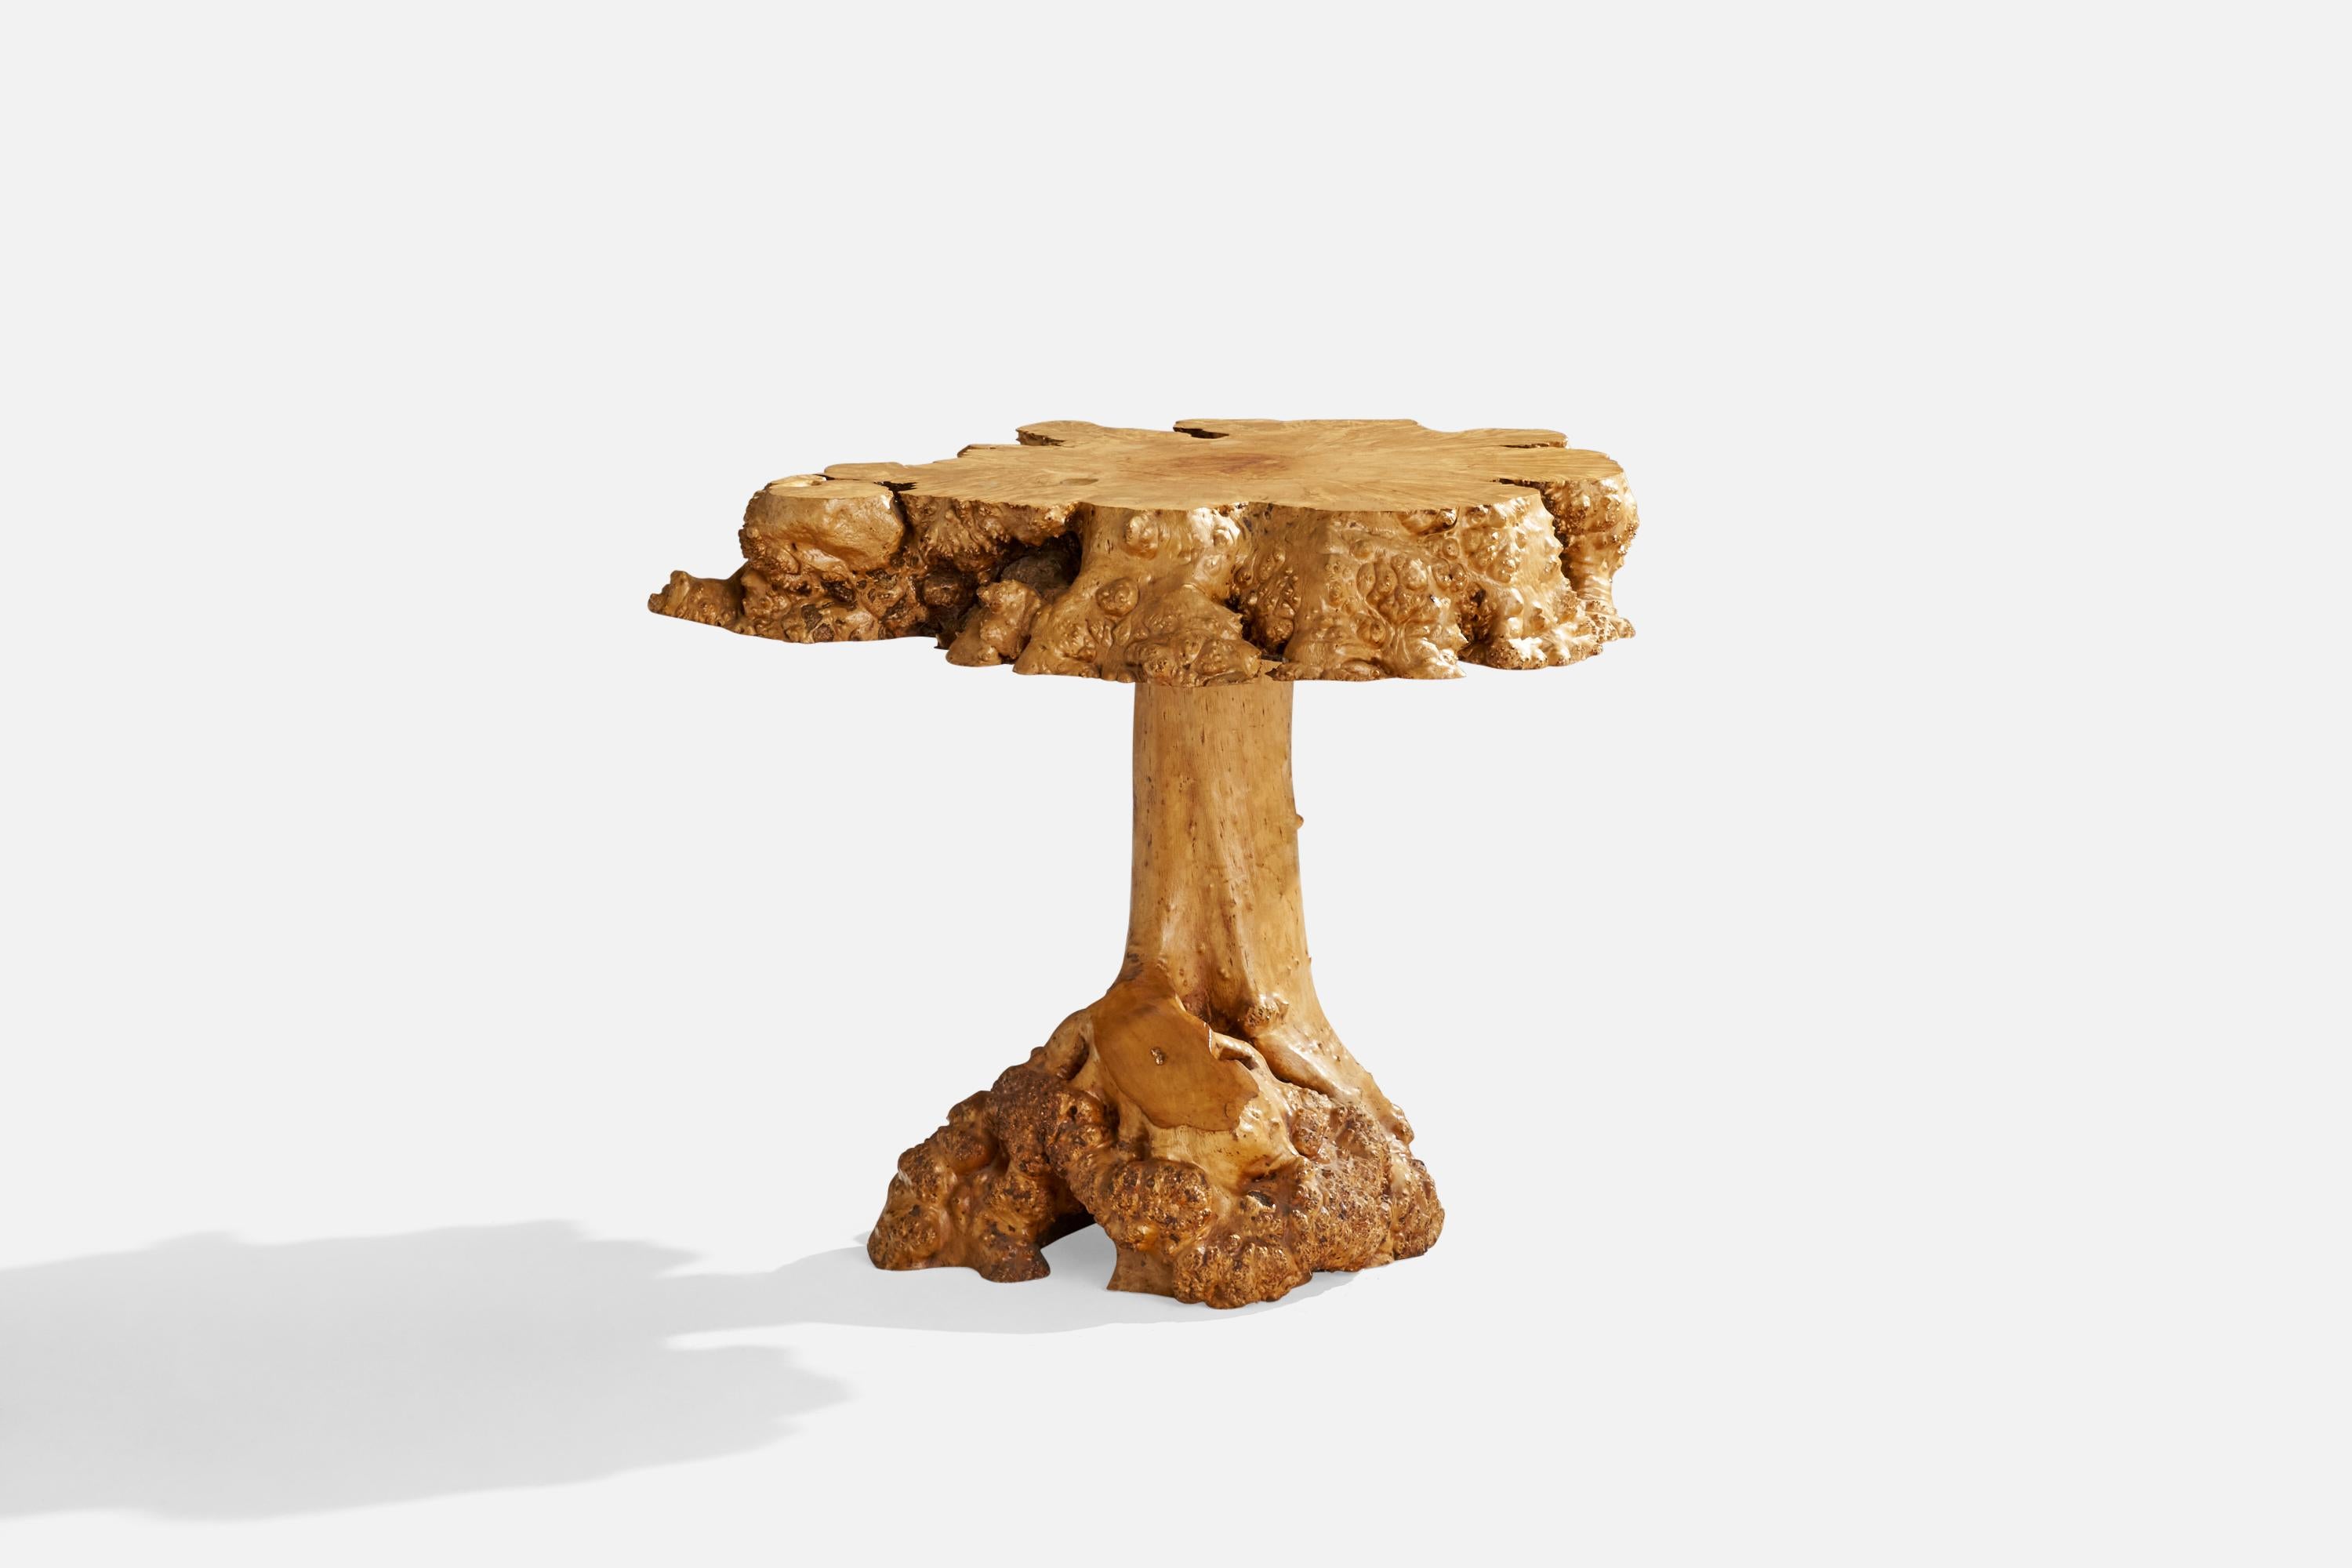 A burl wood side table designed and produced in Sweden, c. 1900.